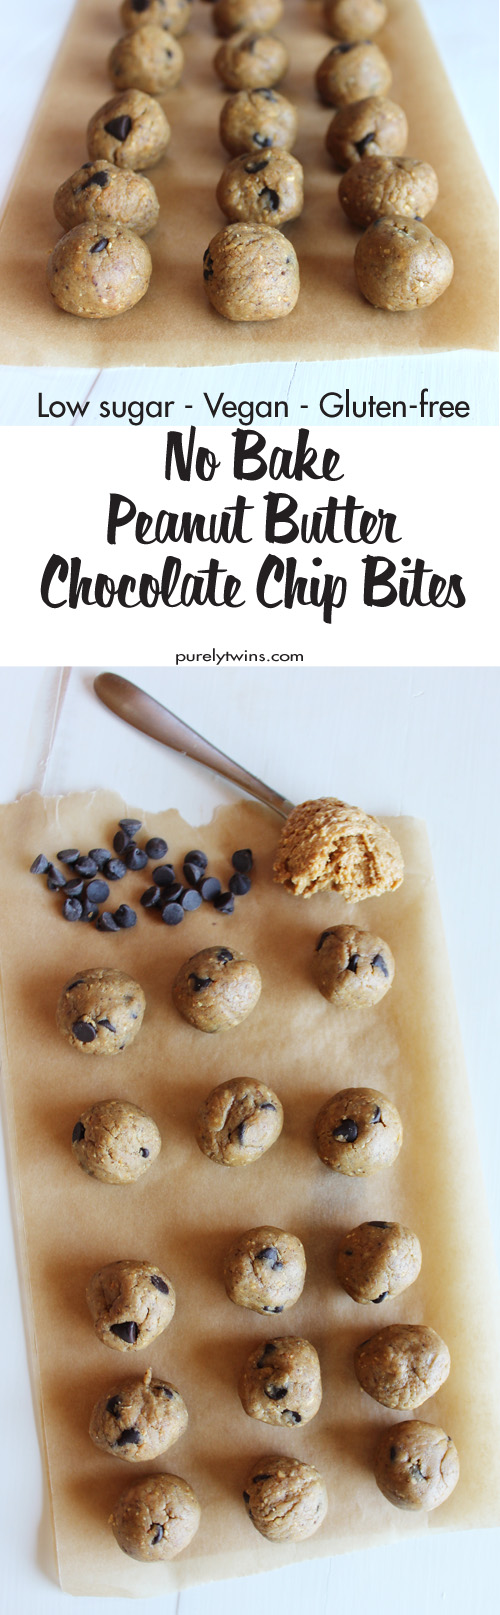 This simple and healthy no bake peanut butter protein energy balls recipe is perfect for easy snacking on-the-go! With protein powder, peanut butter, chocolate, chips, coconut milk and stevia, these energy balls will keep you satisfied for hours!